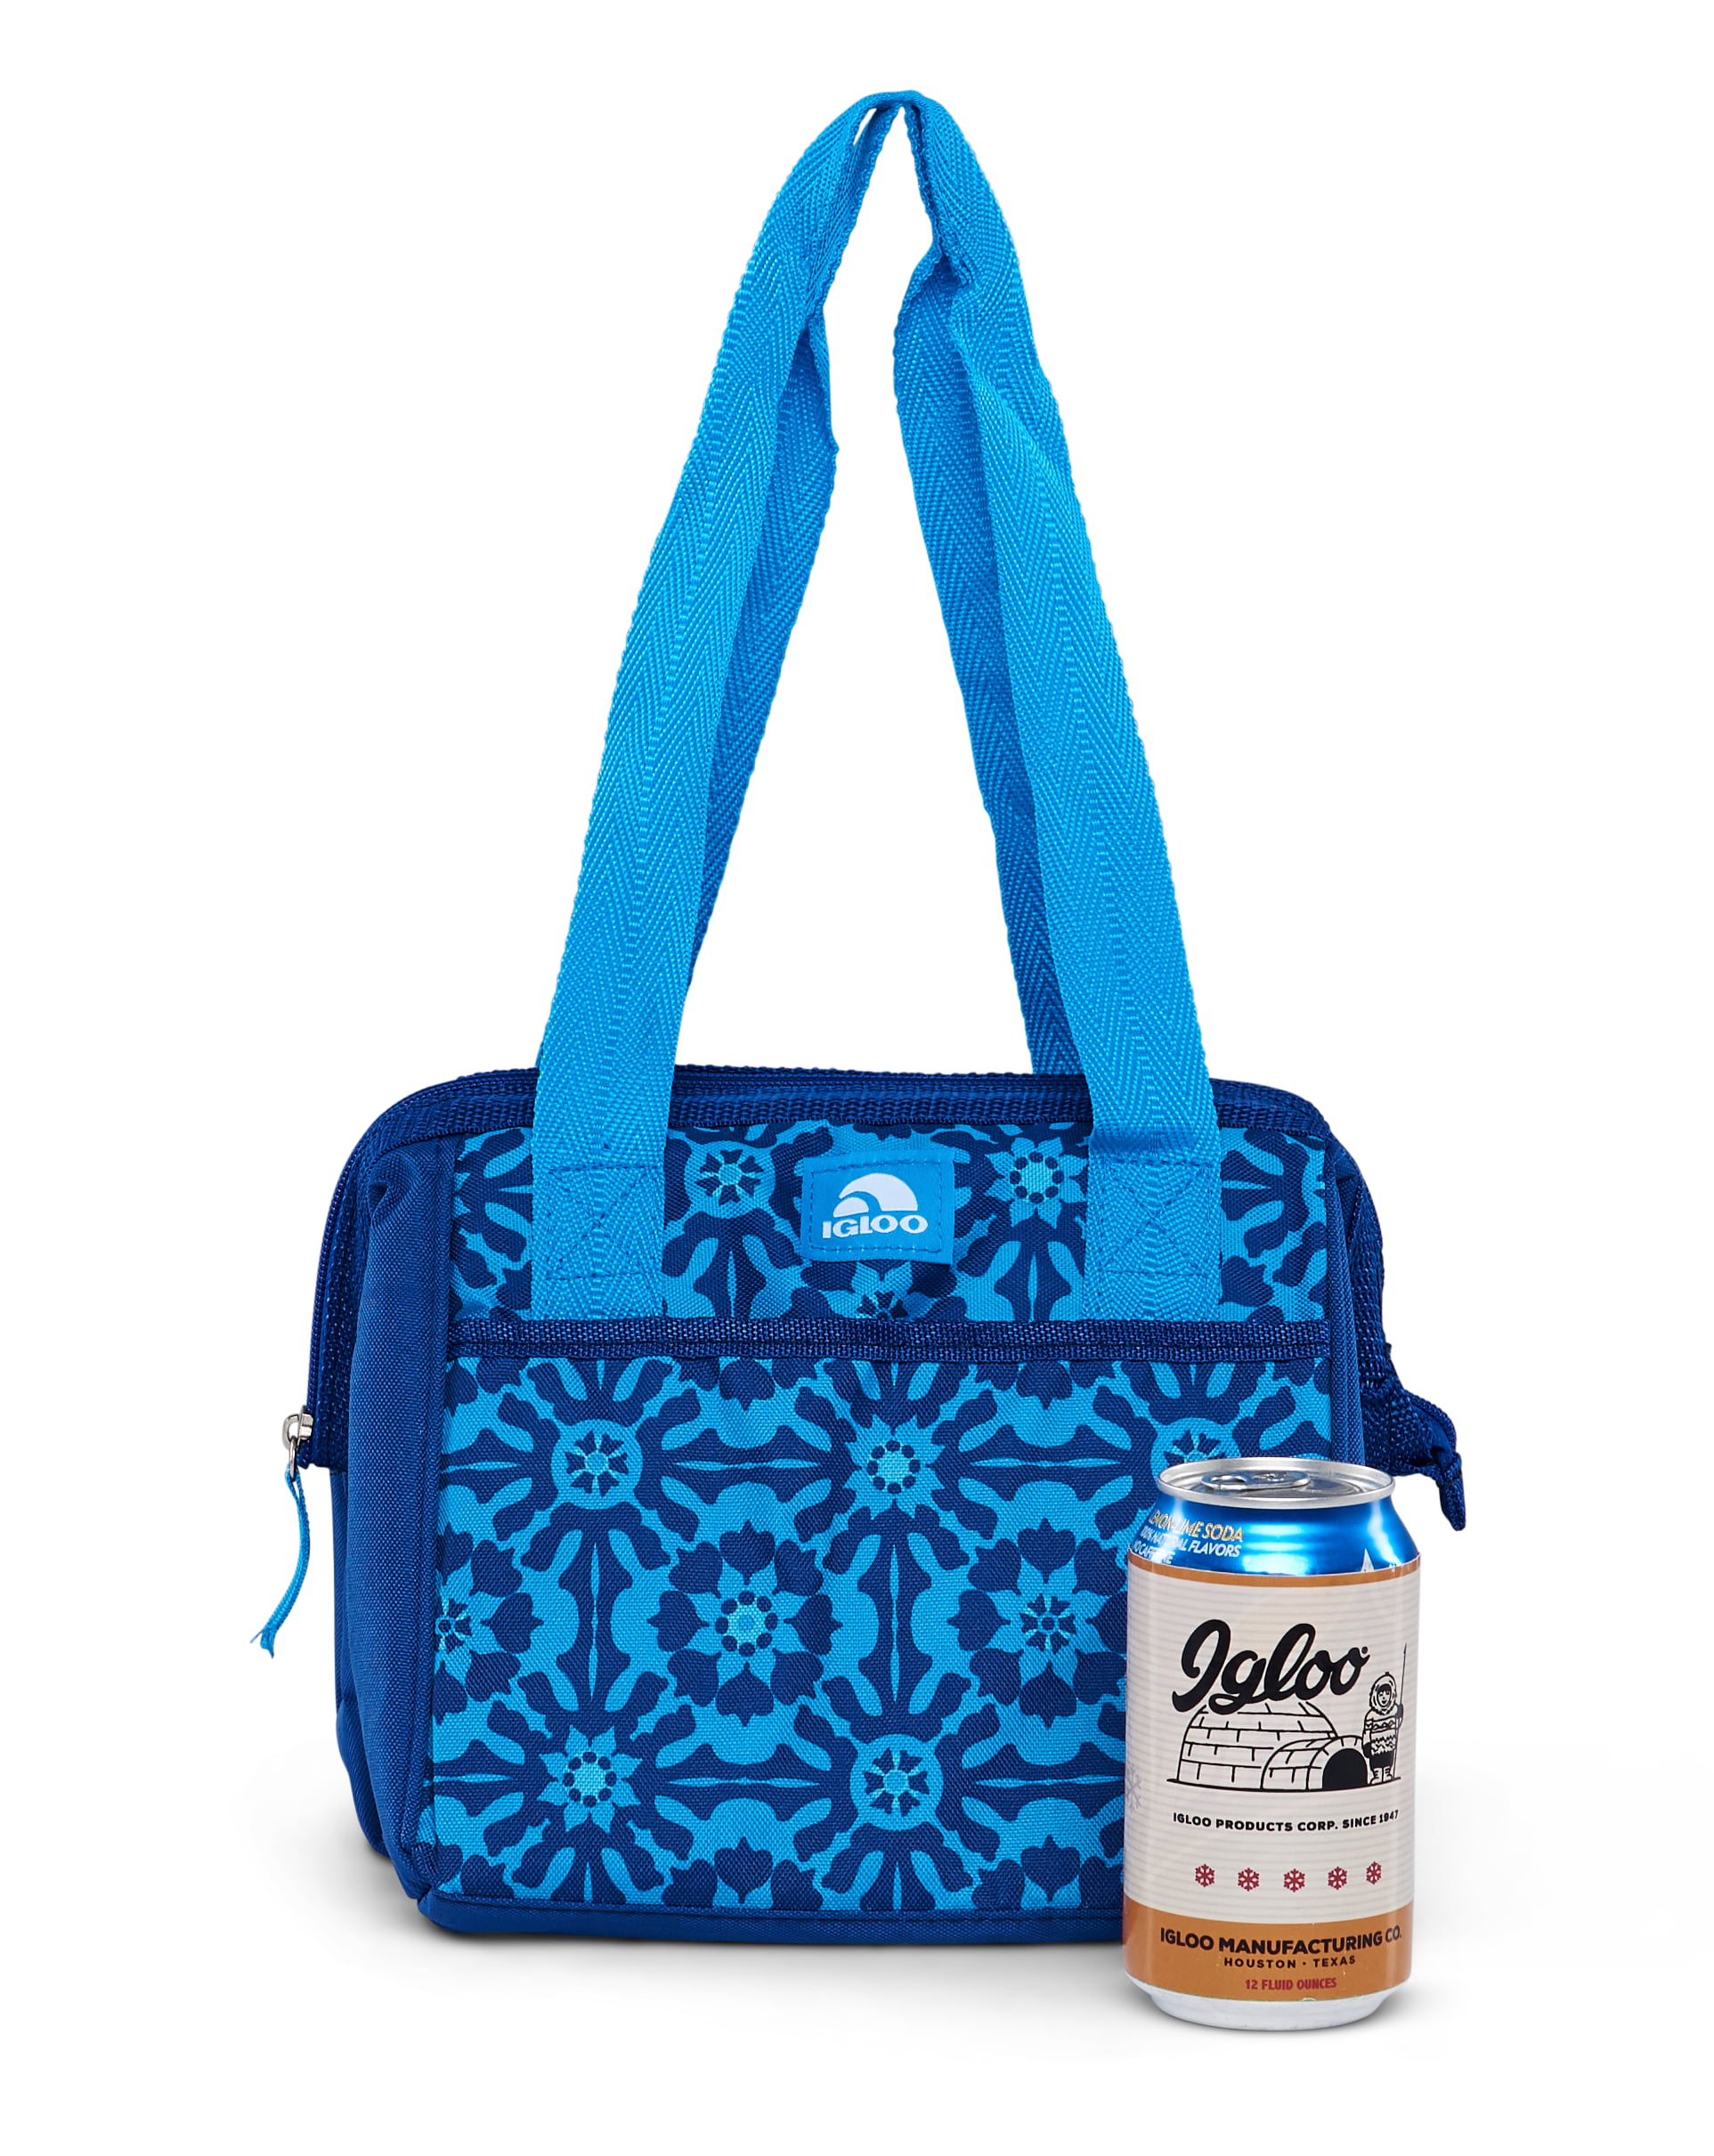 Igloo 9 Can Leftover Tote Lunch Cooler Bag - Navy 